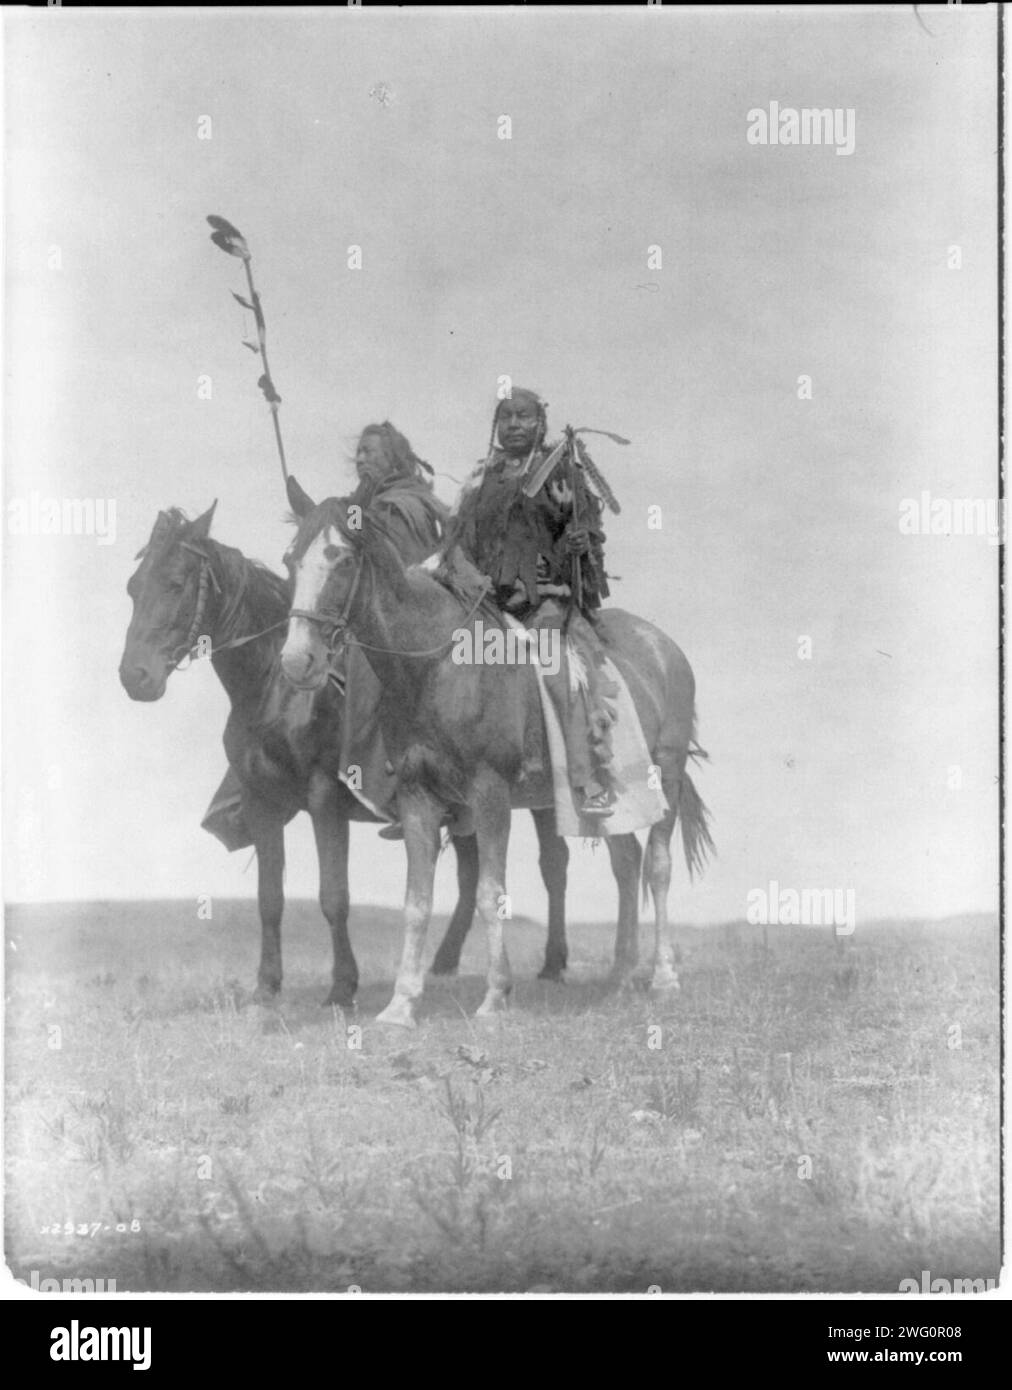 Atsina chiefs, c1908. Two Atsina chiefs on horseback, one with feathered staff and one with a coup stick. Stock Photo